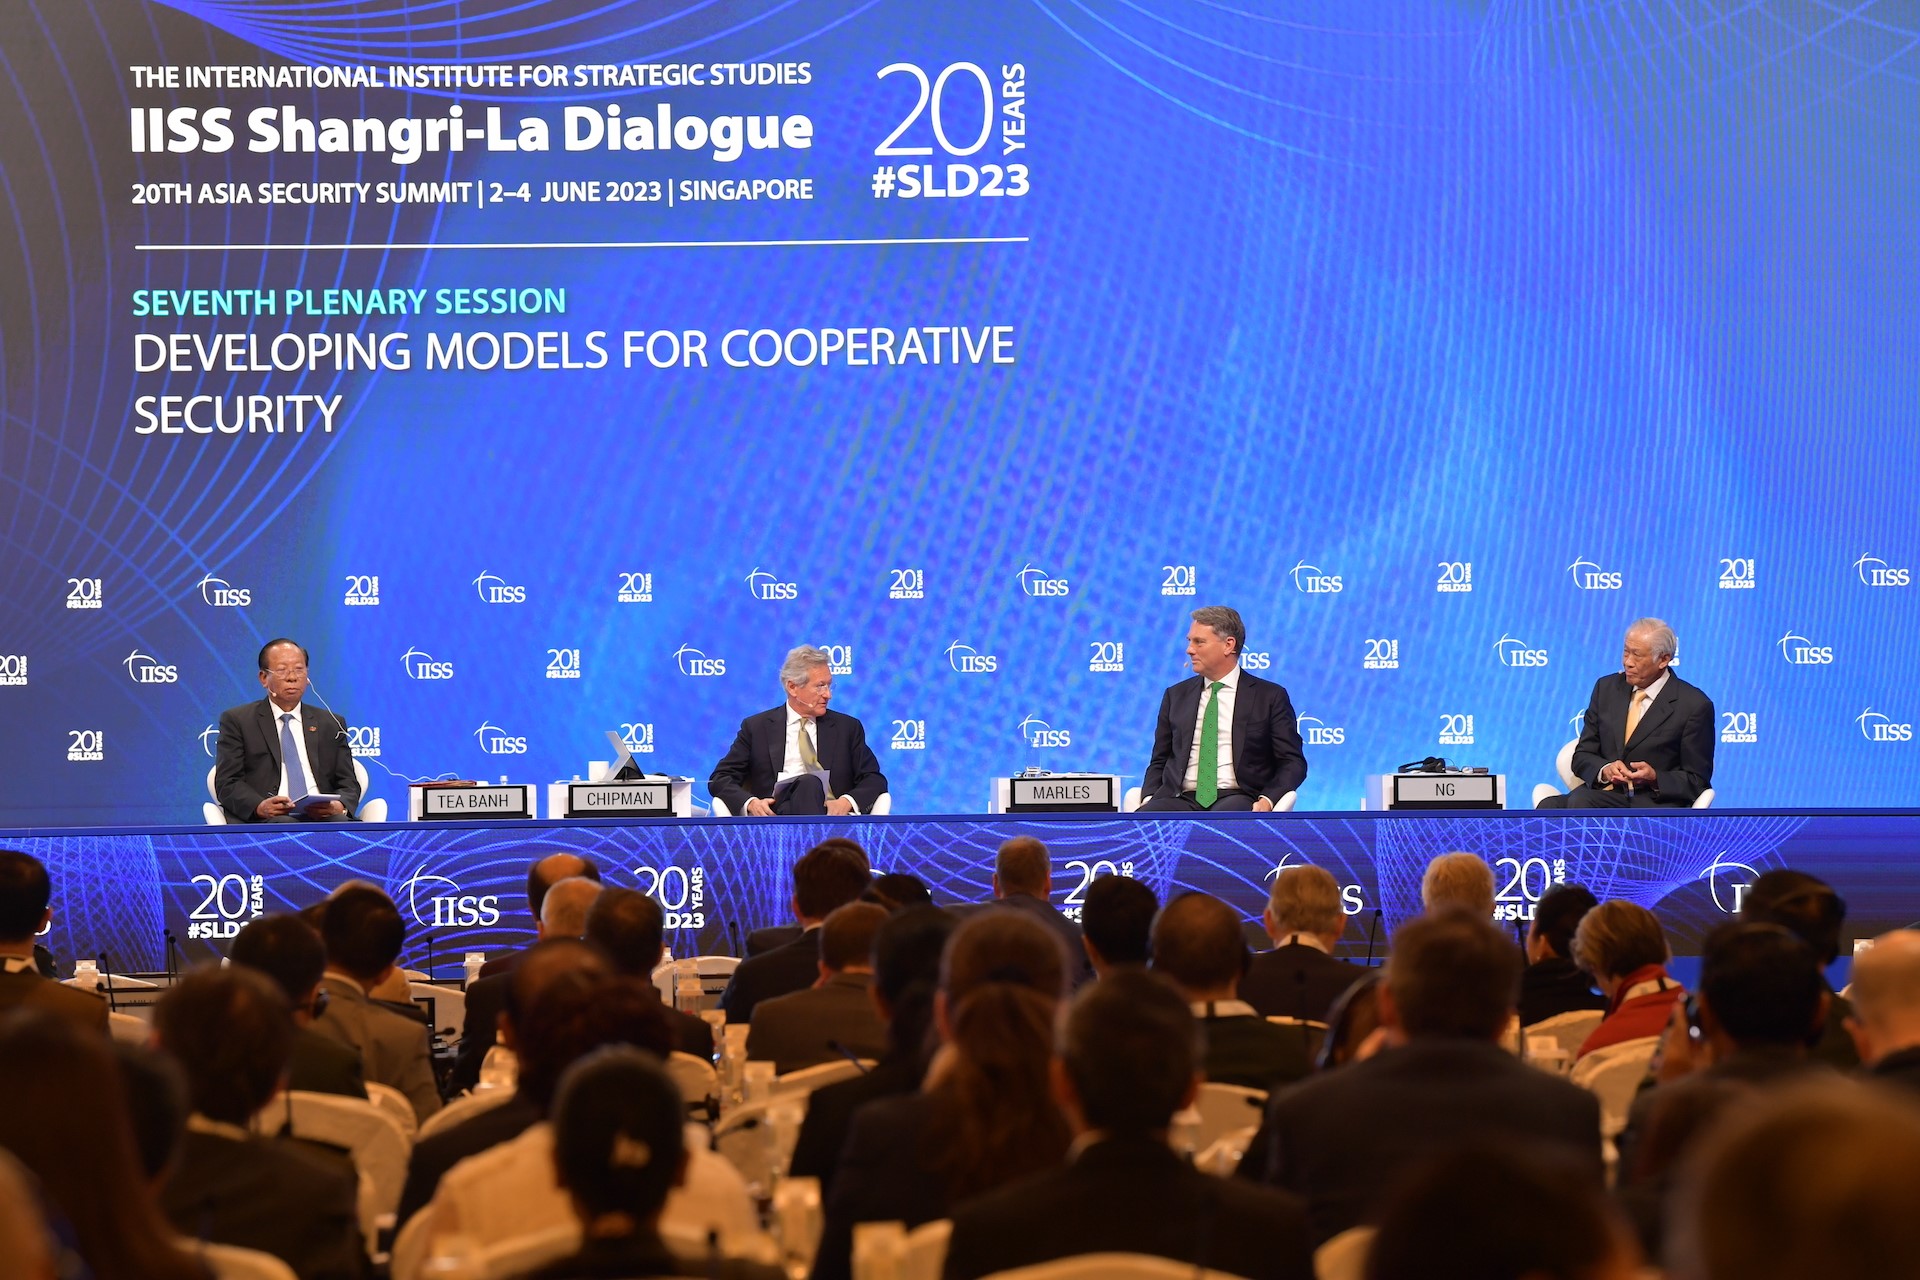 Shangri-La Dialogue sees frank discussion of security issues